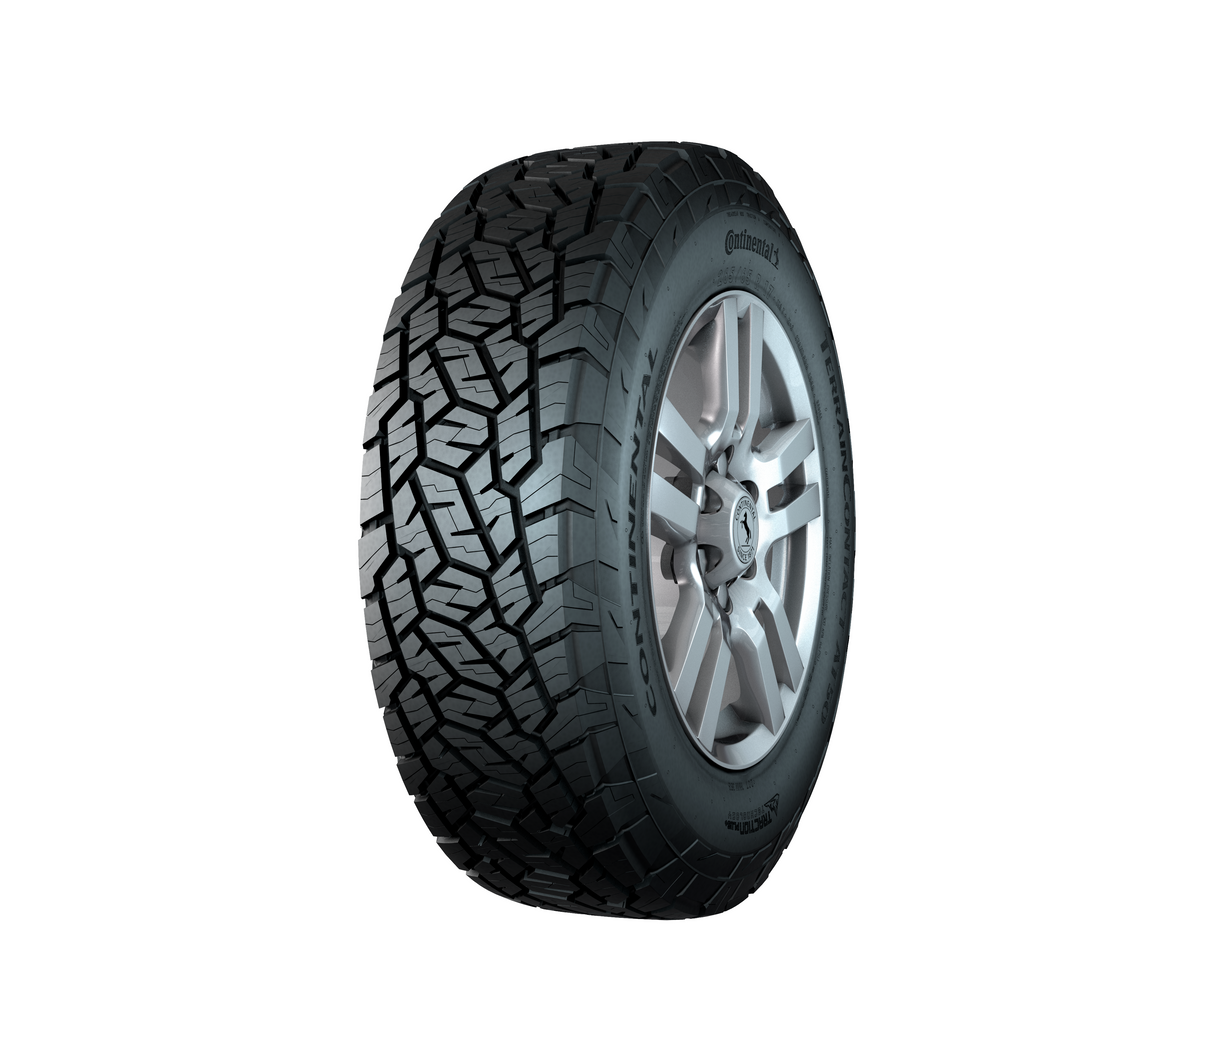 Neumático 275/65R18 123/120S AT50 Continental